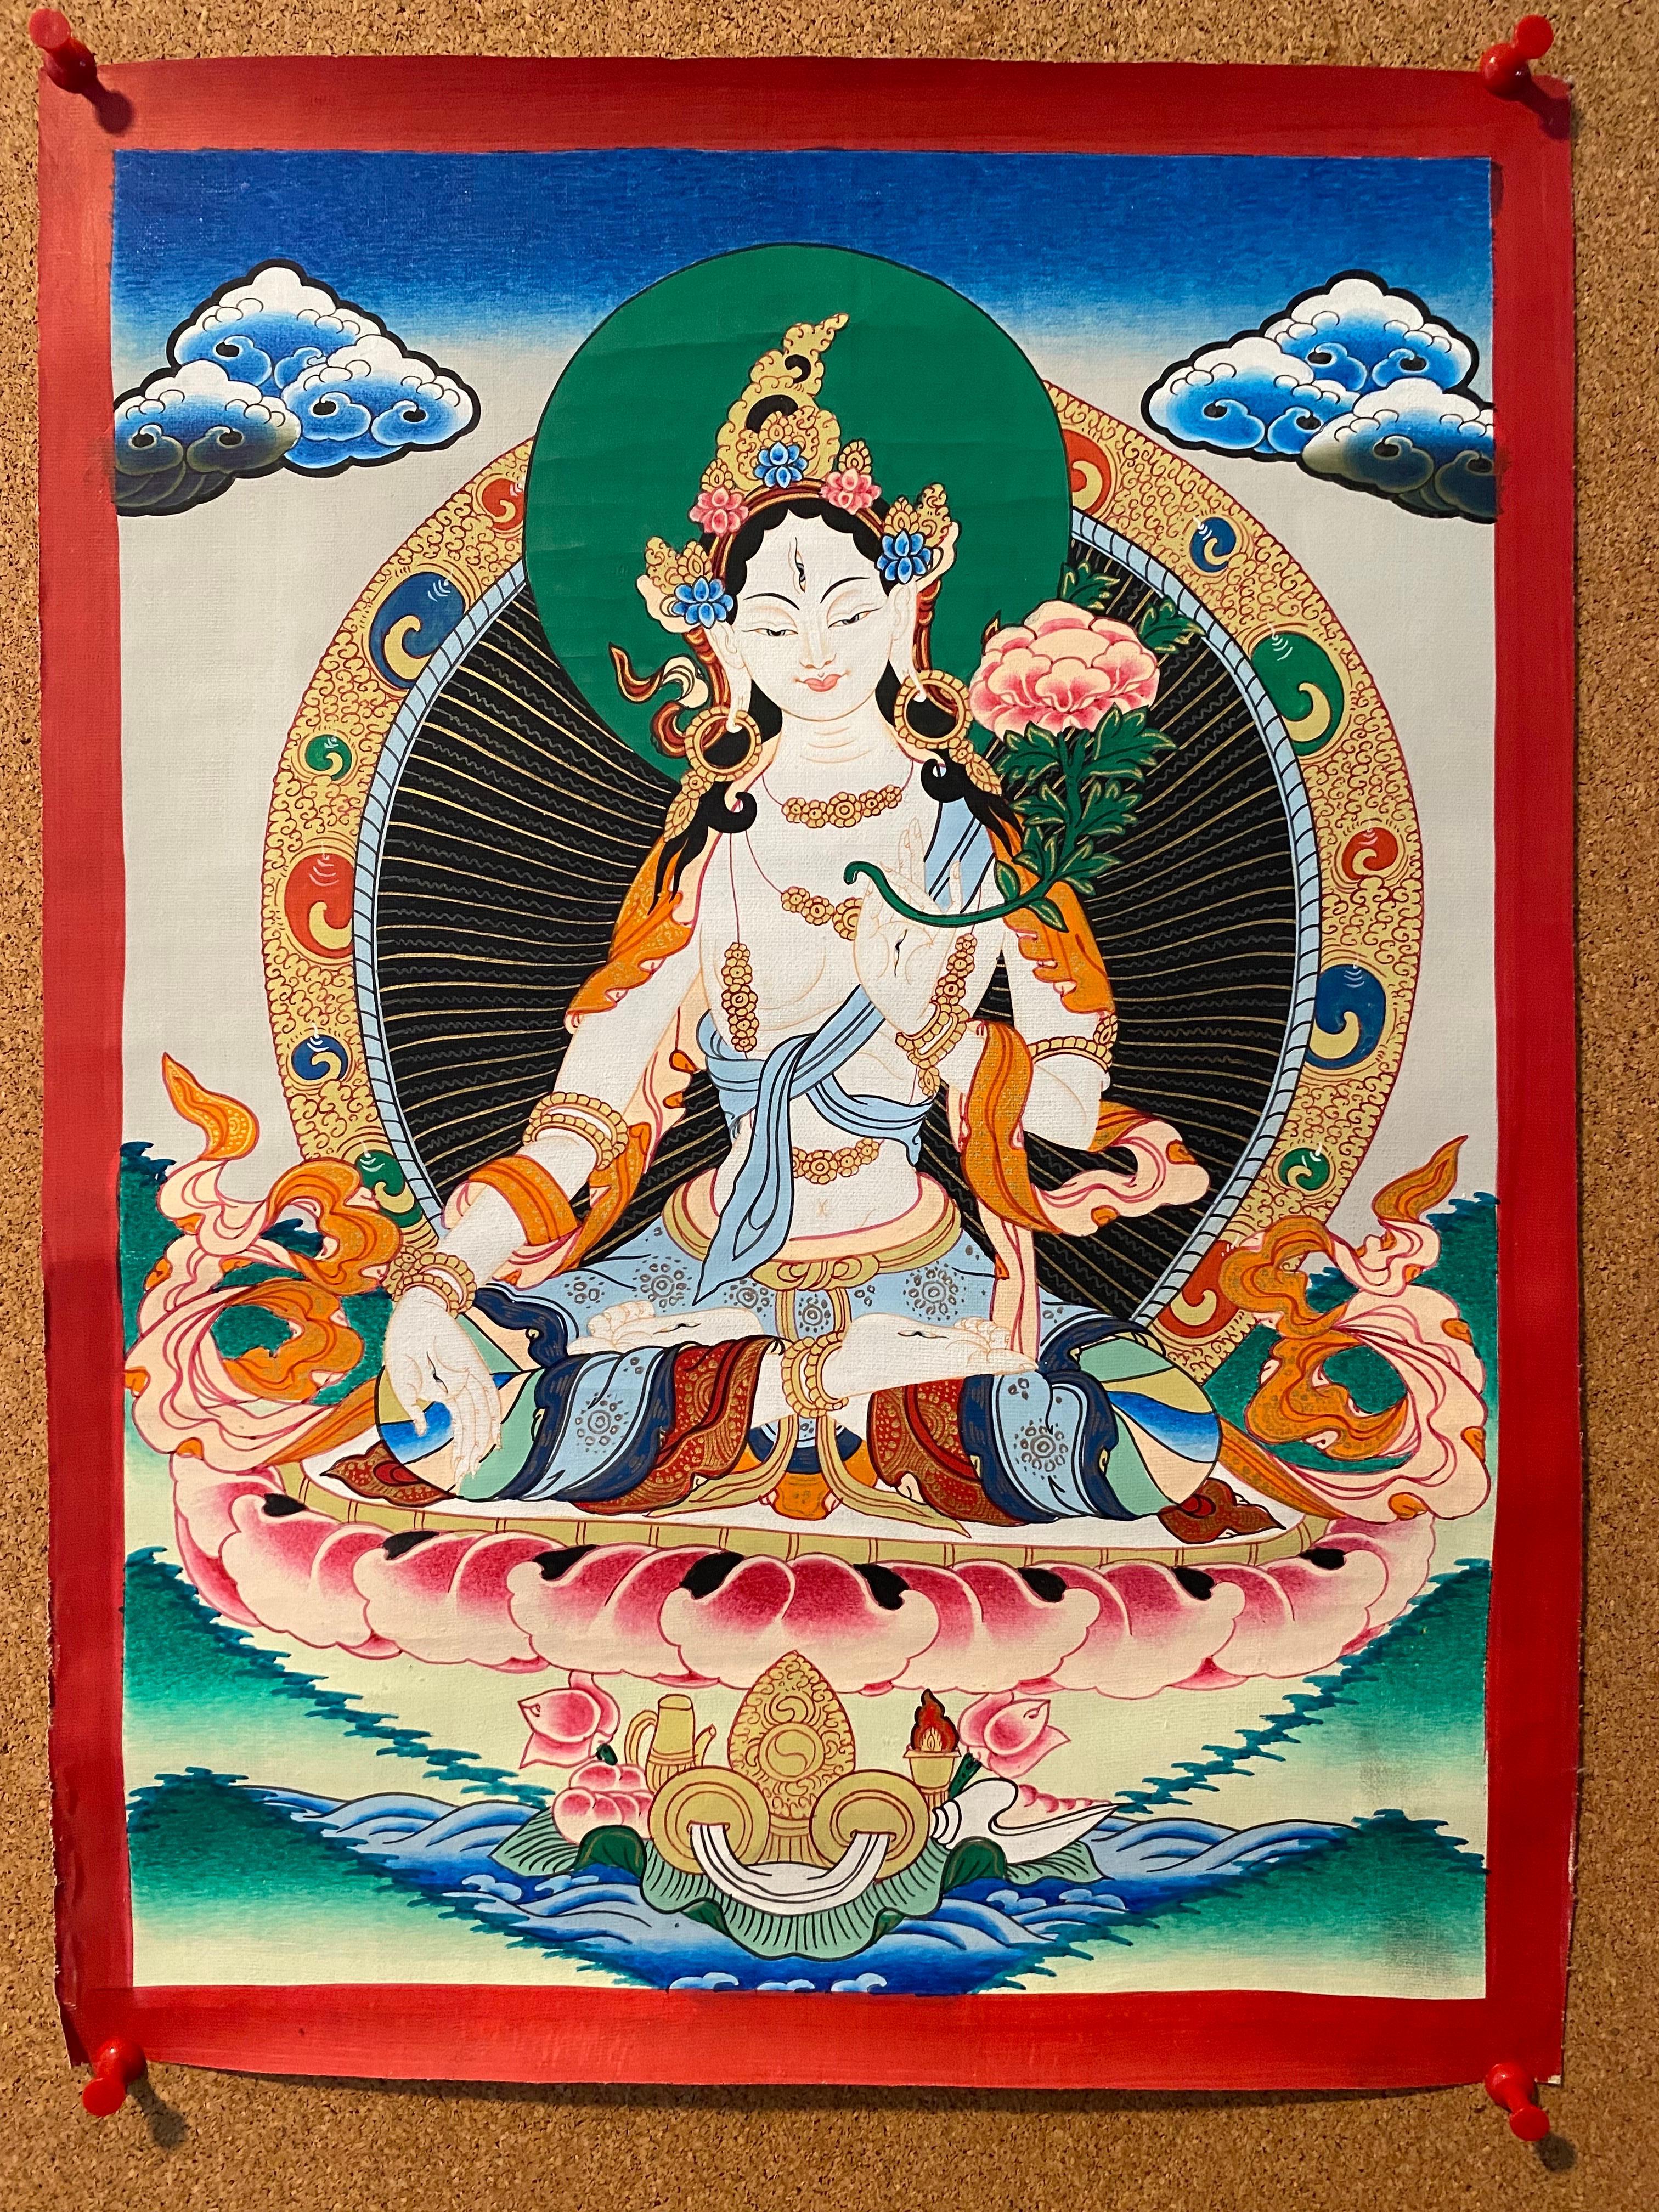 Unframed Hand Painted White Tara Thangka on Canvas 24K Gold - Painting by Unknown